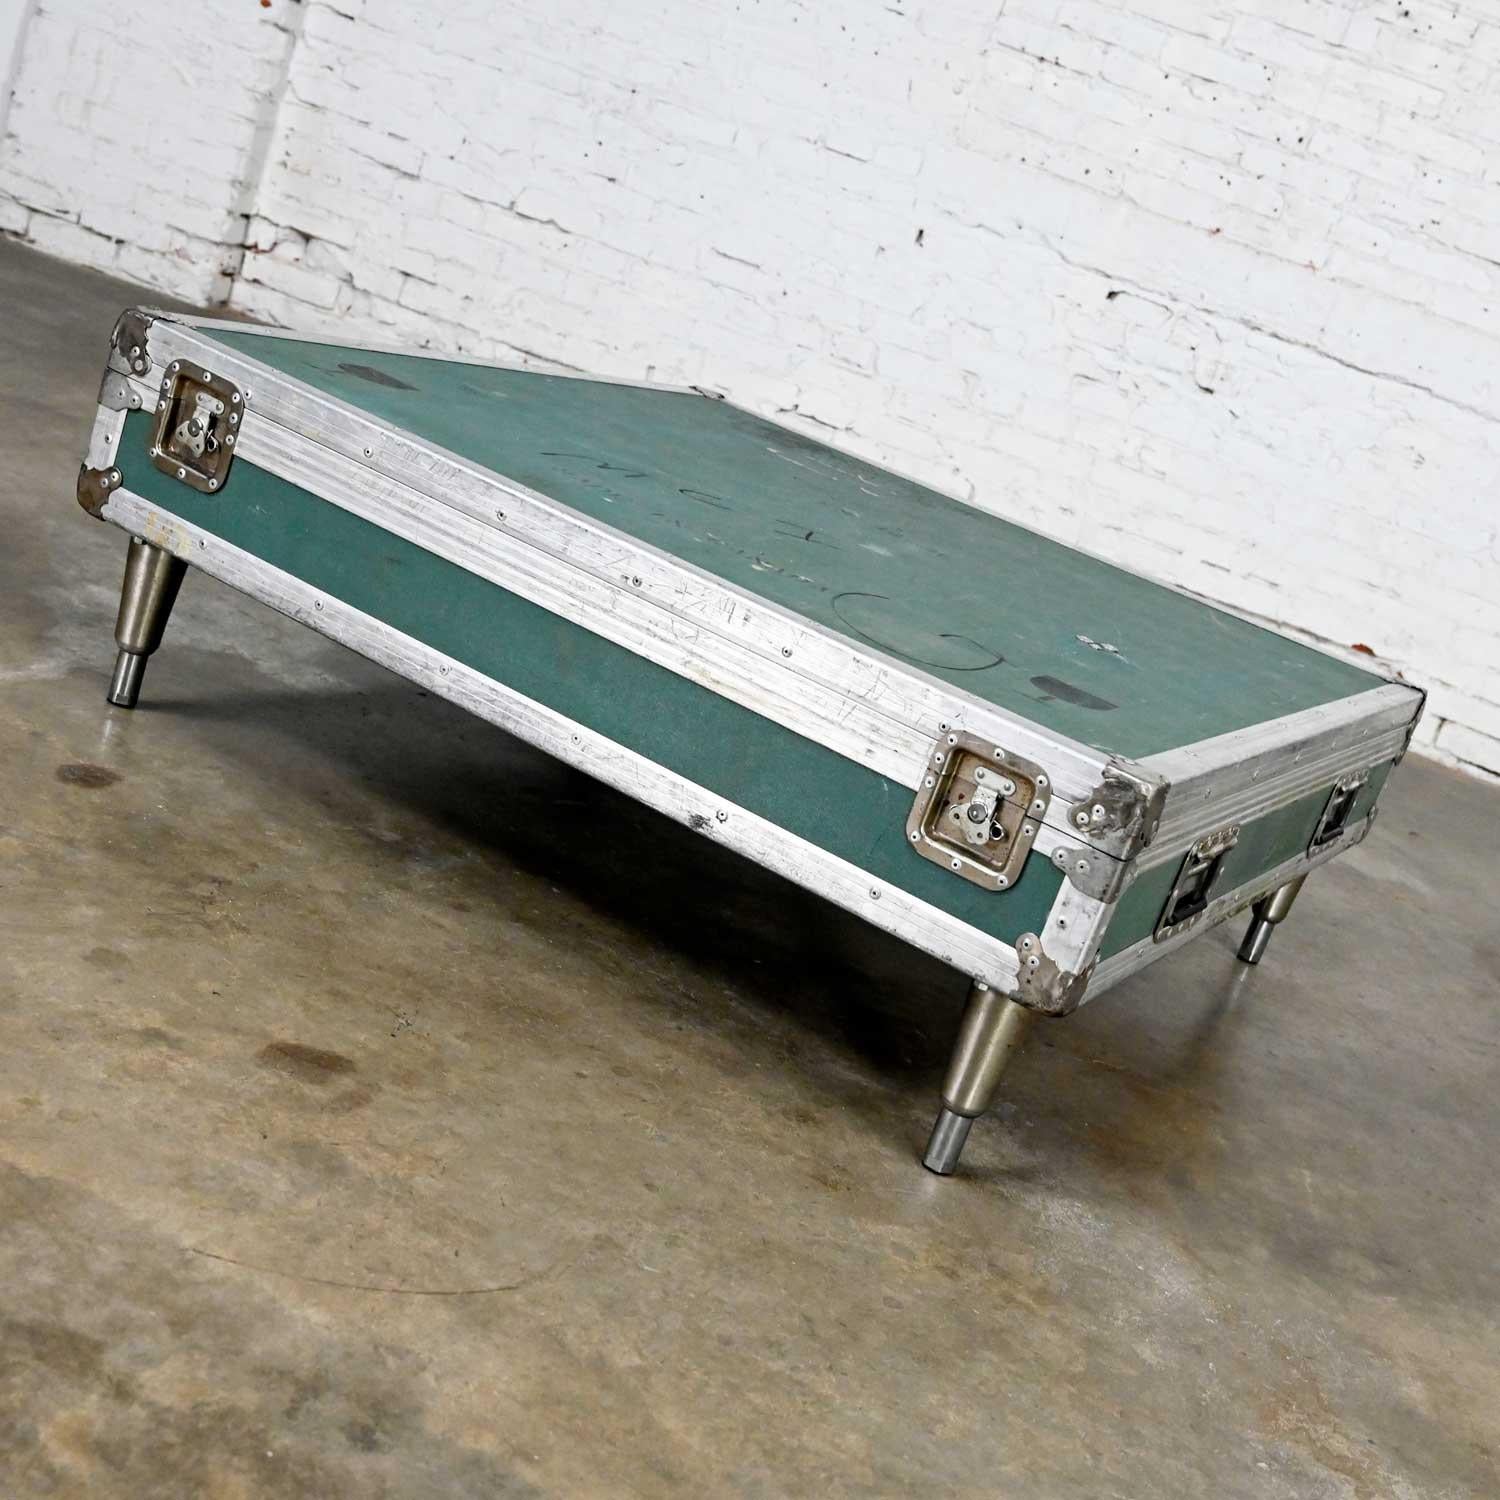 Awesome vintage industrial case low square turquoise coffee table with aluminum edges and chrome latches. Beautiful condition, keeping in mind that this is vintage and not new so will have signs of use and wear. In fact, it has a wonderful and